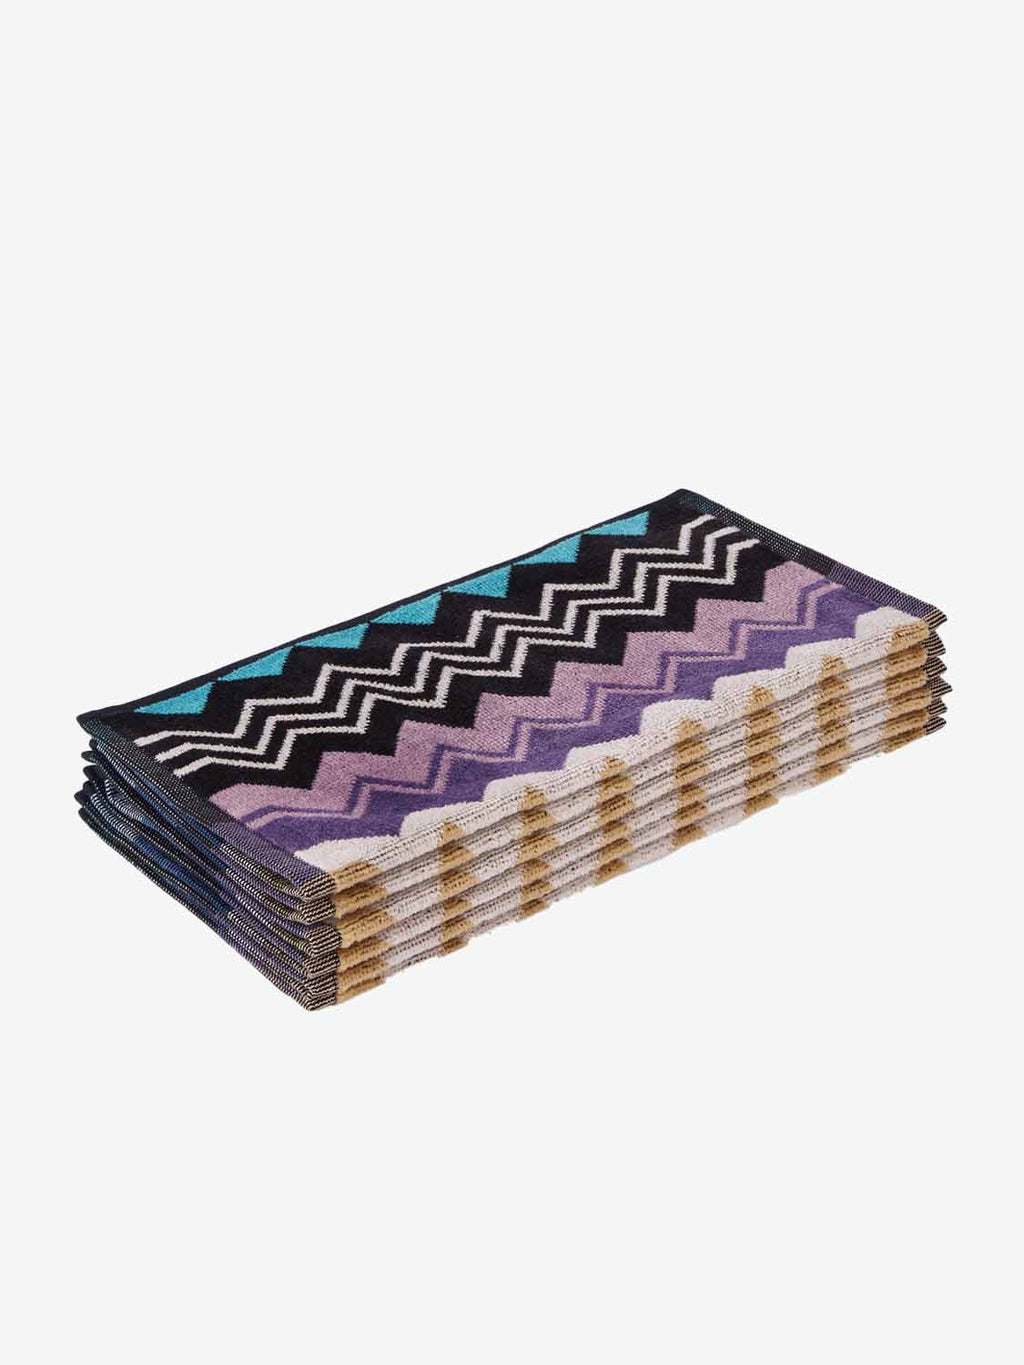 Missoni Home Giacomo Multicolored Face Towels Six Pieces Gift Box